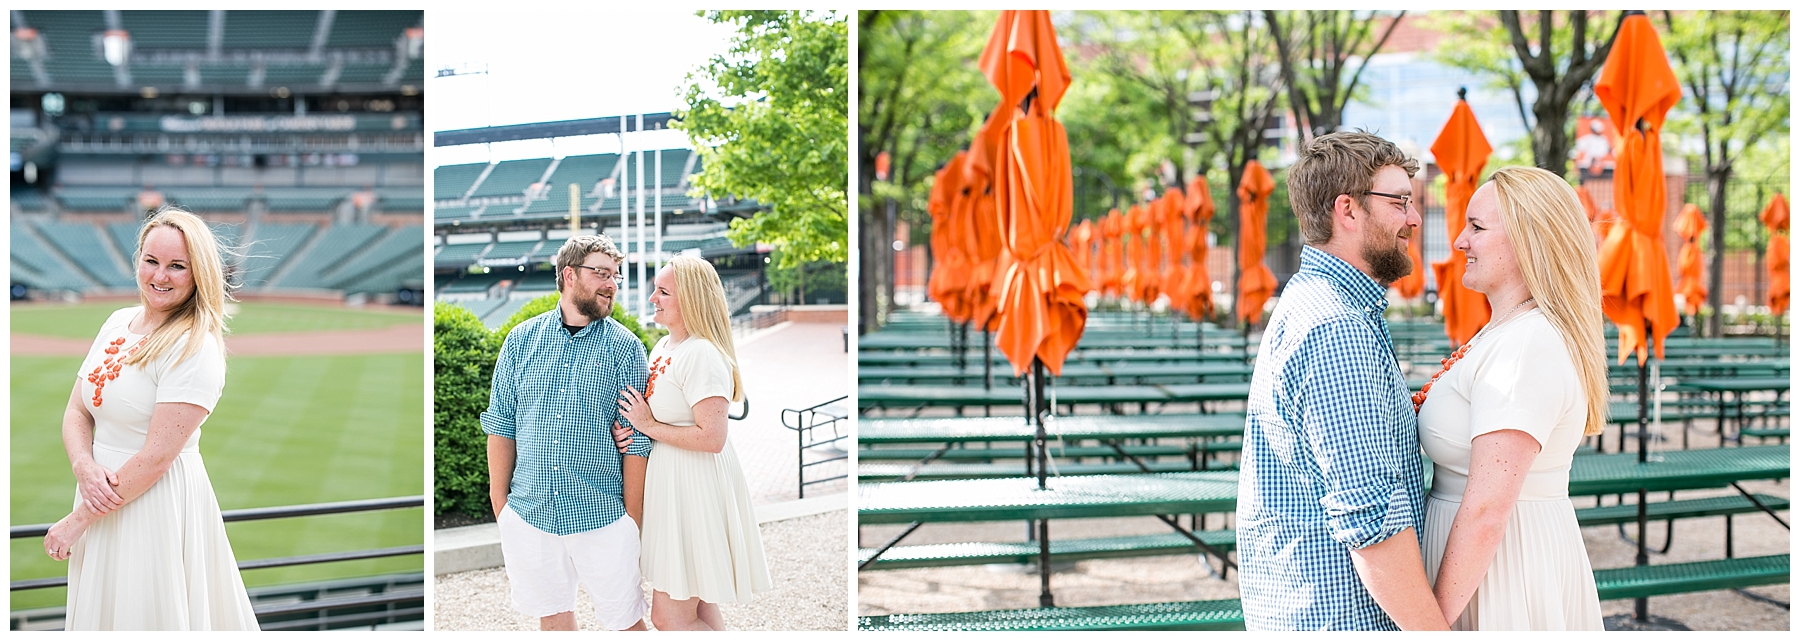 Tess Ray Camden Yards Engagement Session Living Radiant Photography photos_0030.jpg